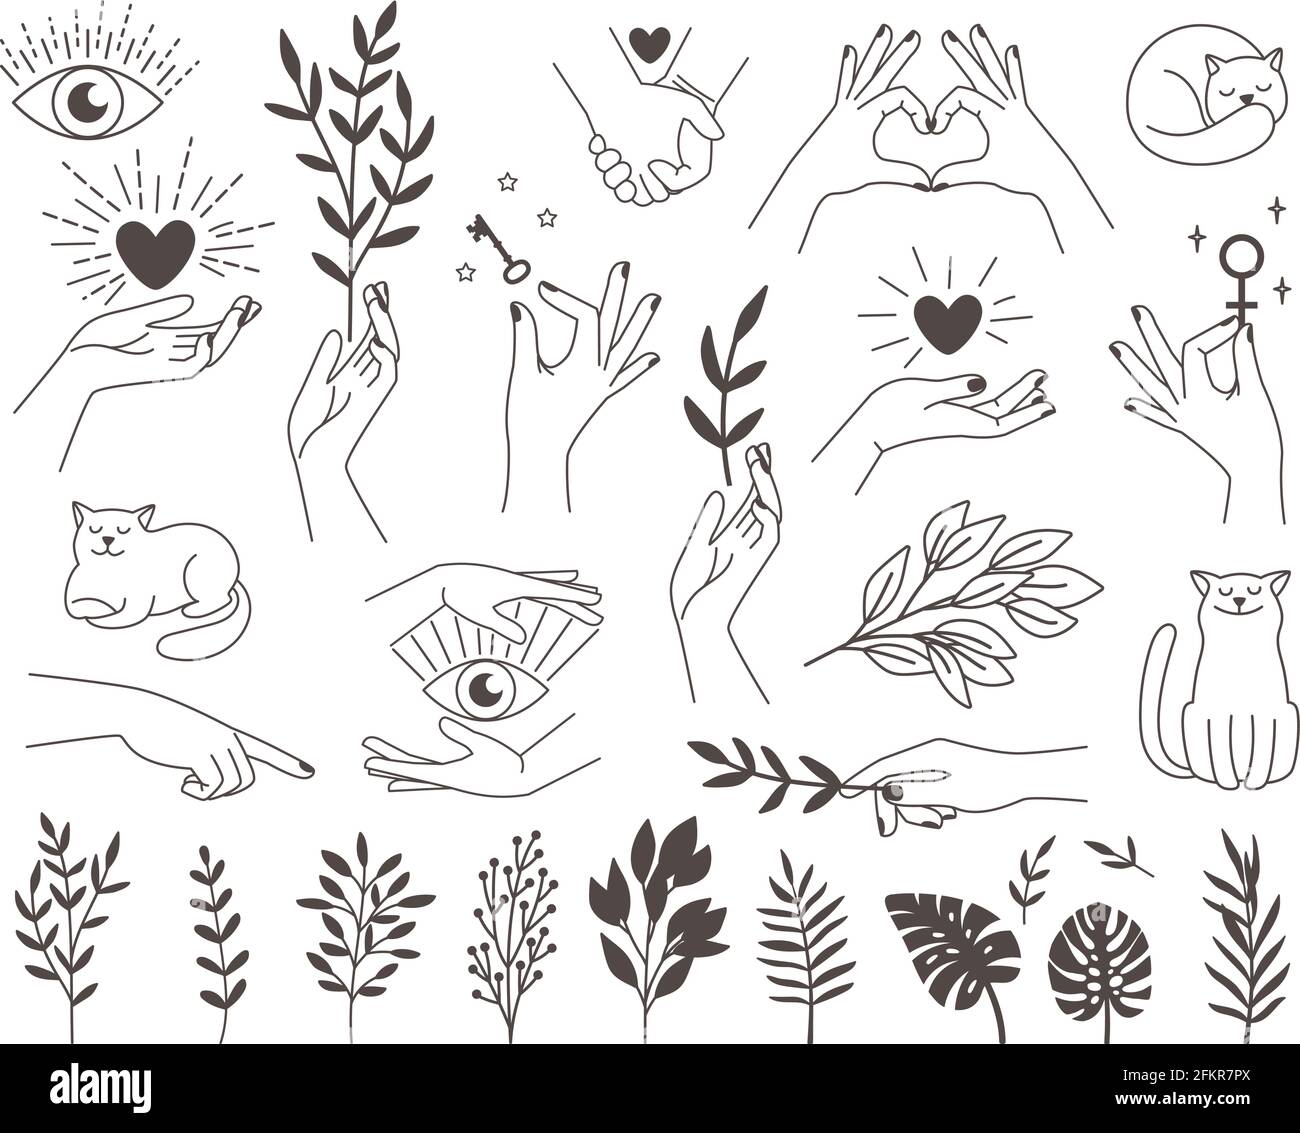 https://c8.alamy.com/comp/2FKR7PX/collection-icons-magic-hands-tattoo-design-logos-female-vector-hands-with-mystical-illustrations-heart-key-occult-eye-cat-icon-and-set-of-branches-on-white-back-2FKR7PX.jpg